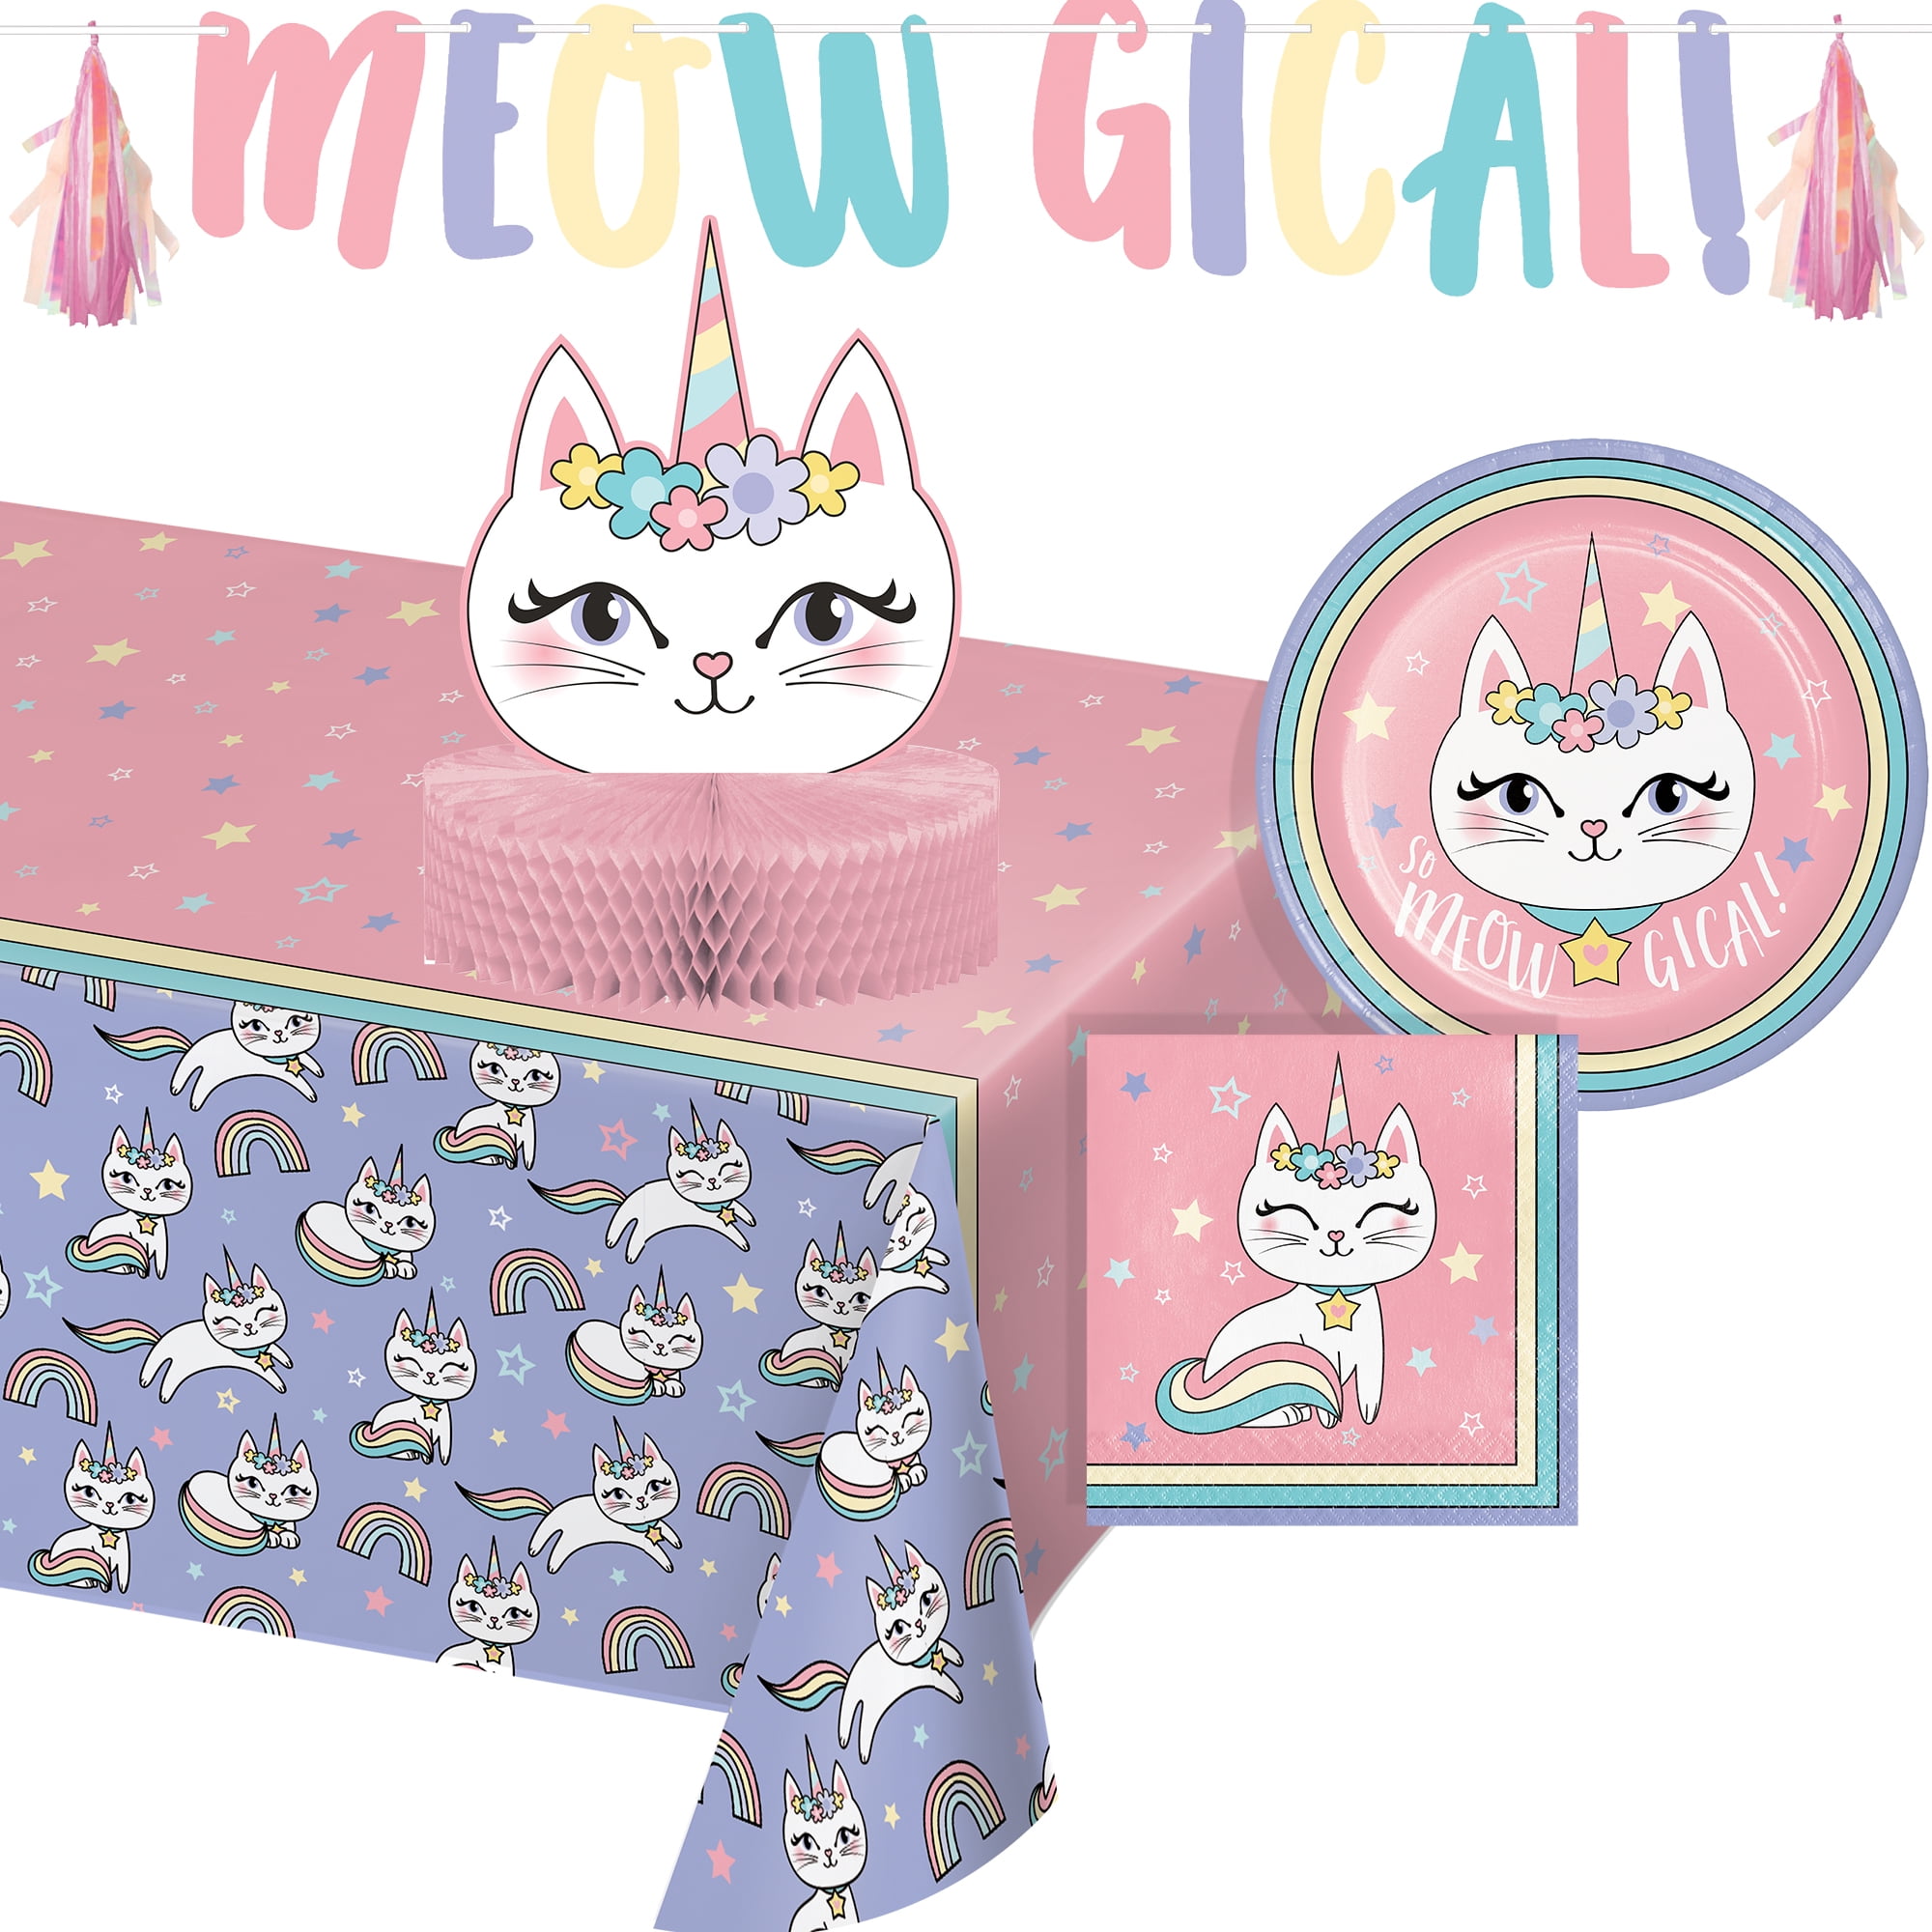 Includes Meowgical Caticorn Birthday Banner Hanging Decorations and Centerpiece Caticorn Party Supplies and Decorations Perfect Caticorn Birthday Party Decorations and Cat Birthday Party Supplies! Caticorn Photo Props and Star Cutouts